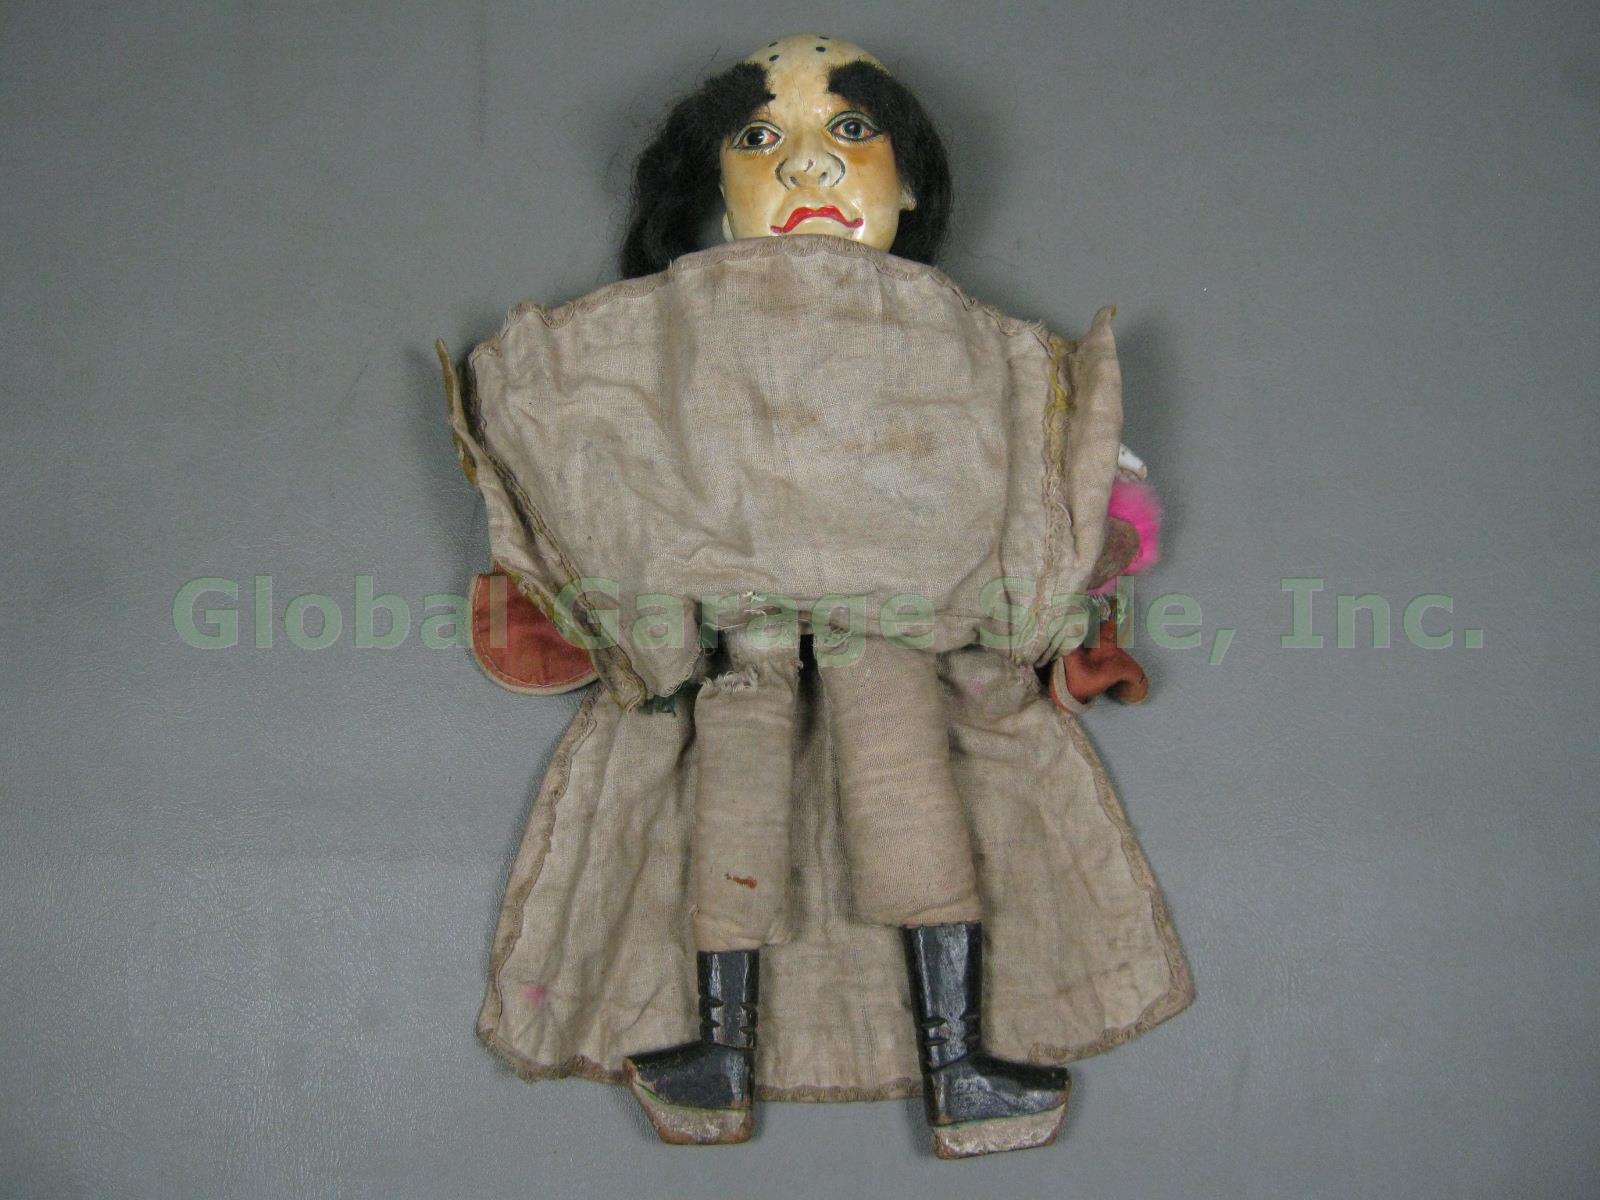 Antique Chinese 16" Puppet Doll Marionette Wooden Head Silk Clothing Human Hair? 20